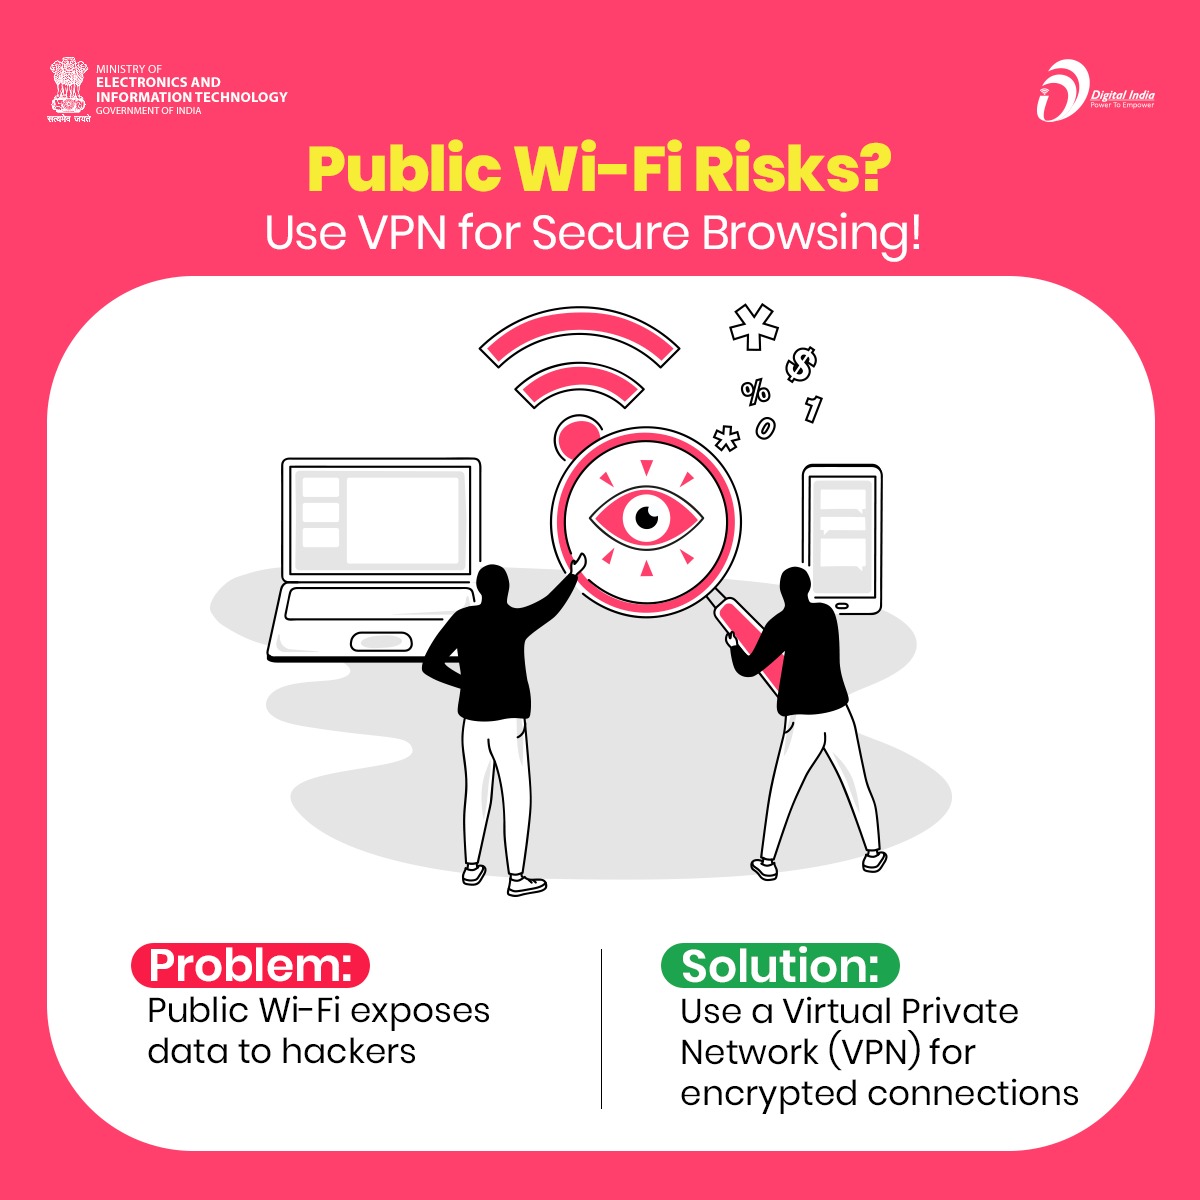 Browse securely! Use a VPN (a mechanism for creating a secure connection between a computing device and a computer network) on public Wi-Fi to encrypt your internet connection. Keep your data safe from hackers. 🌐🔒 #VPNSecurity #CyberSafetyTips #DigitalIndia